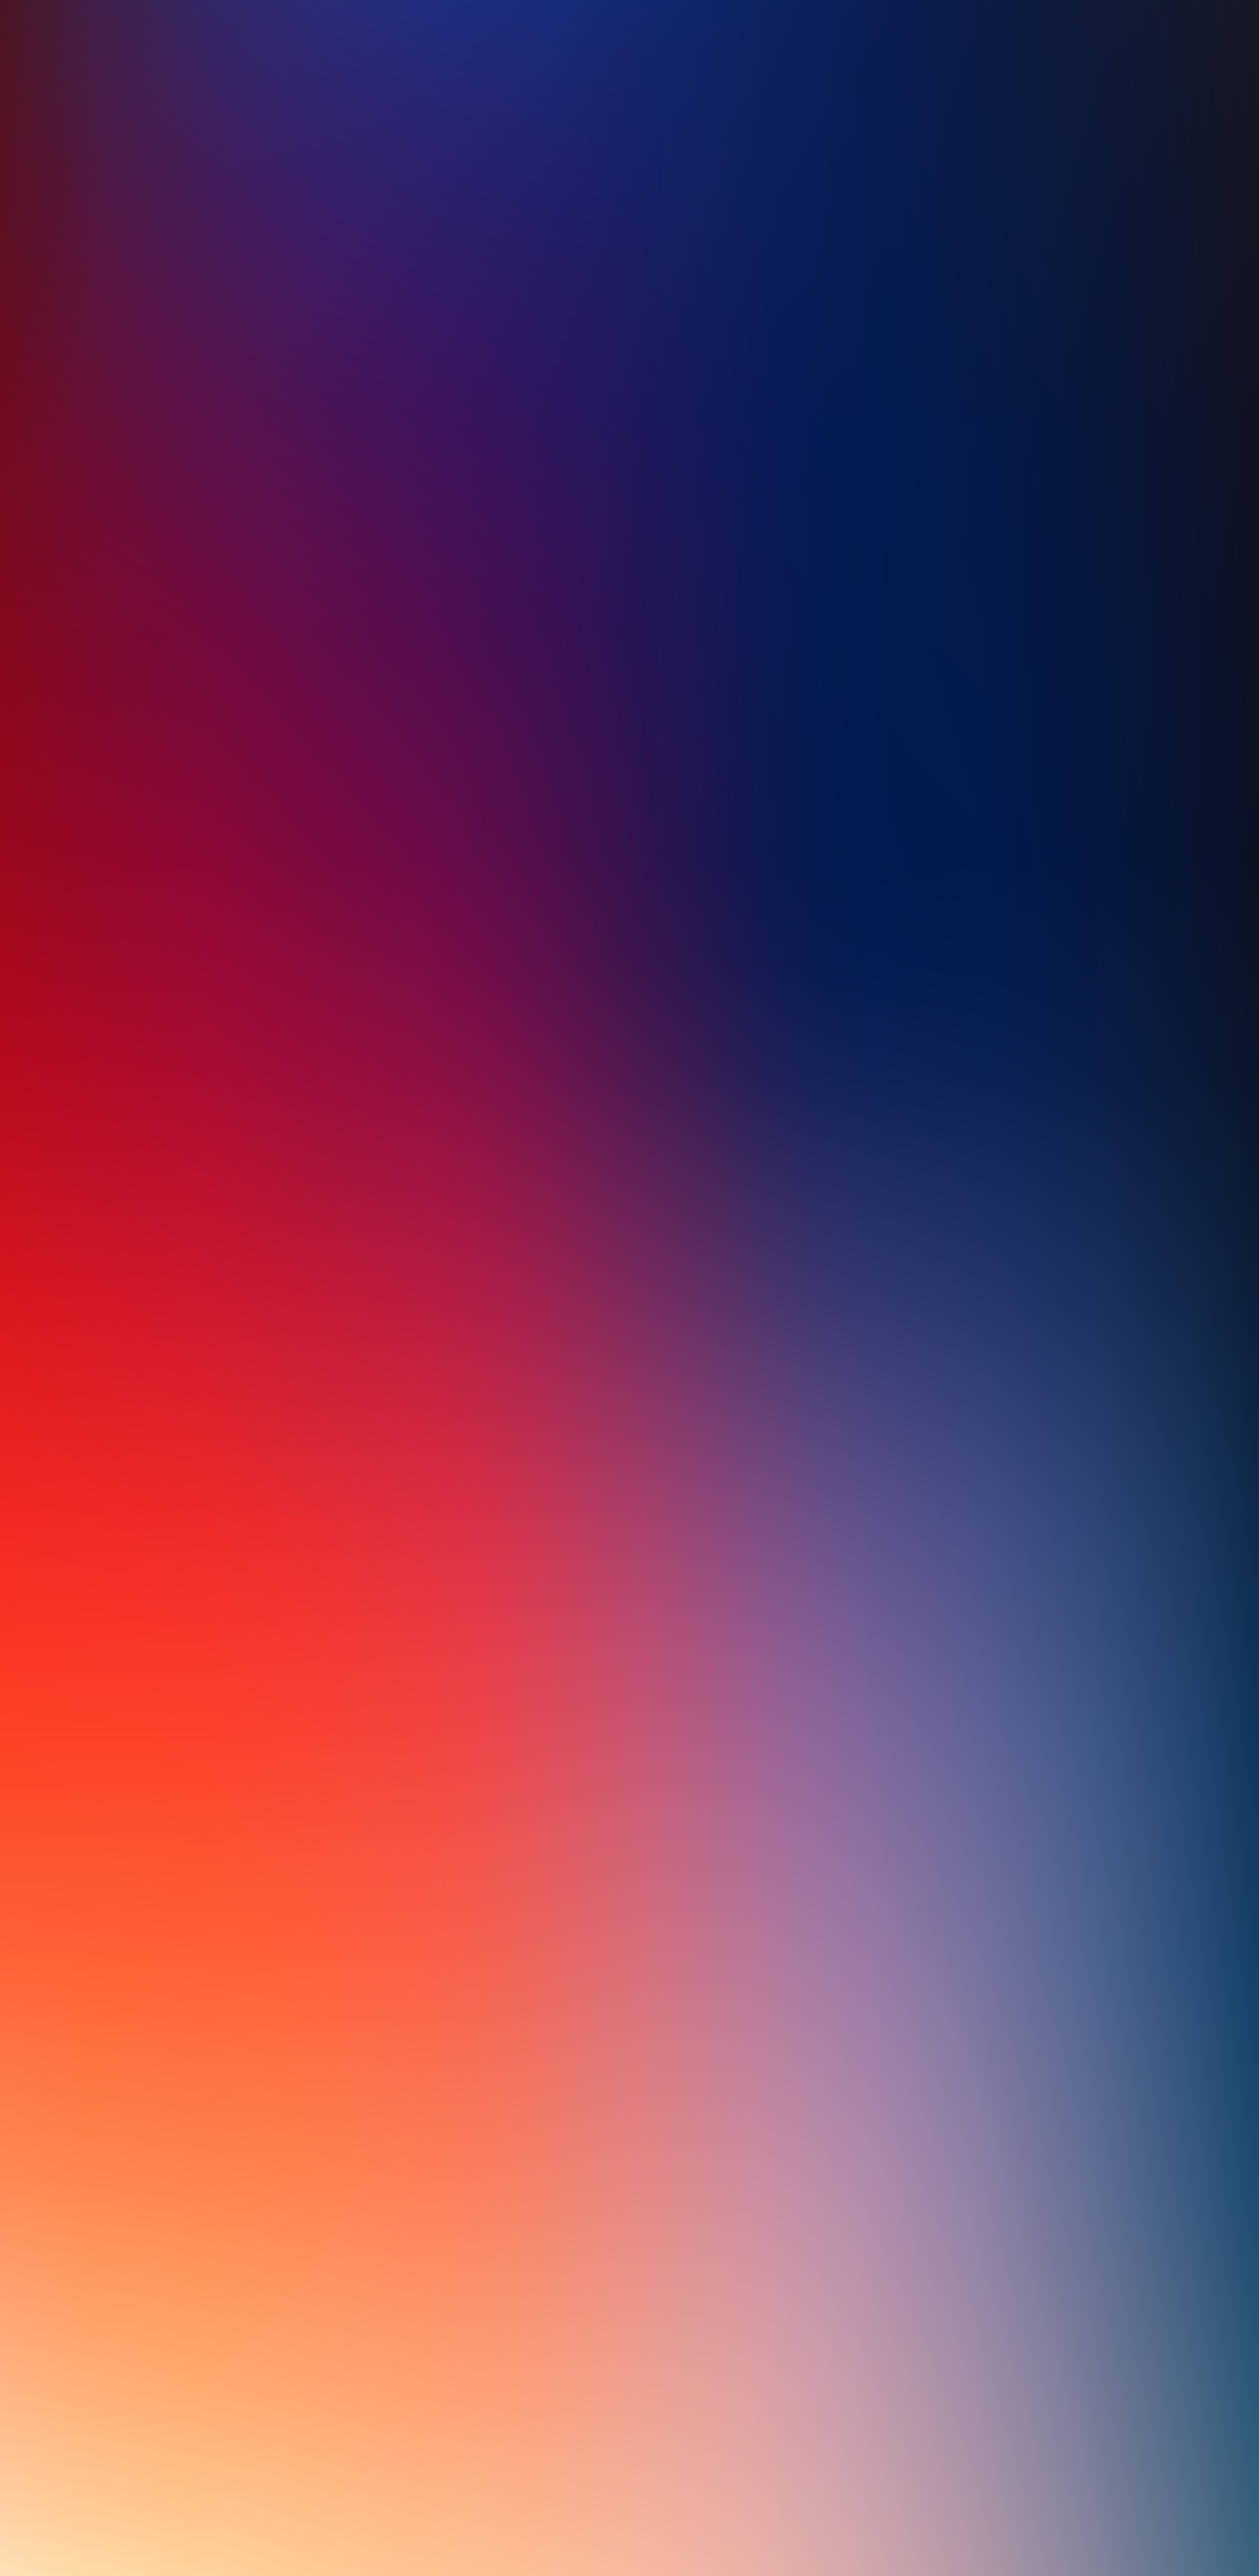 Heres my version of that redblack gradient wallpaper thats so  popularonly in blue  riphone